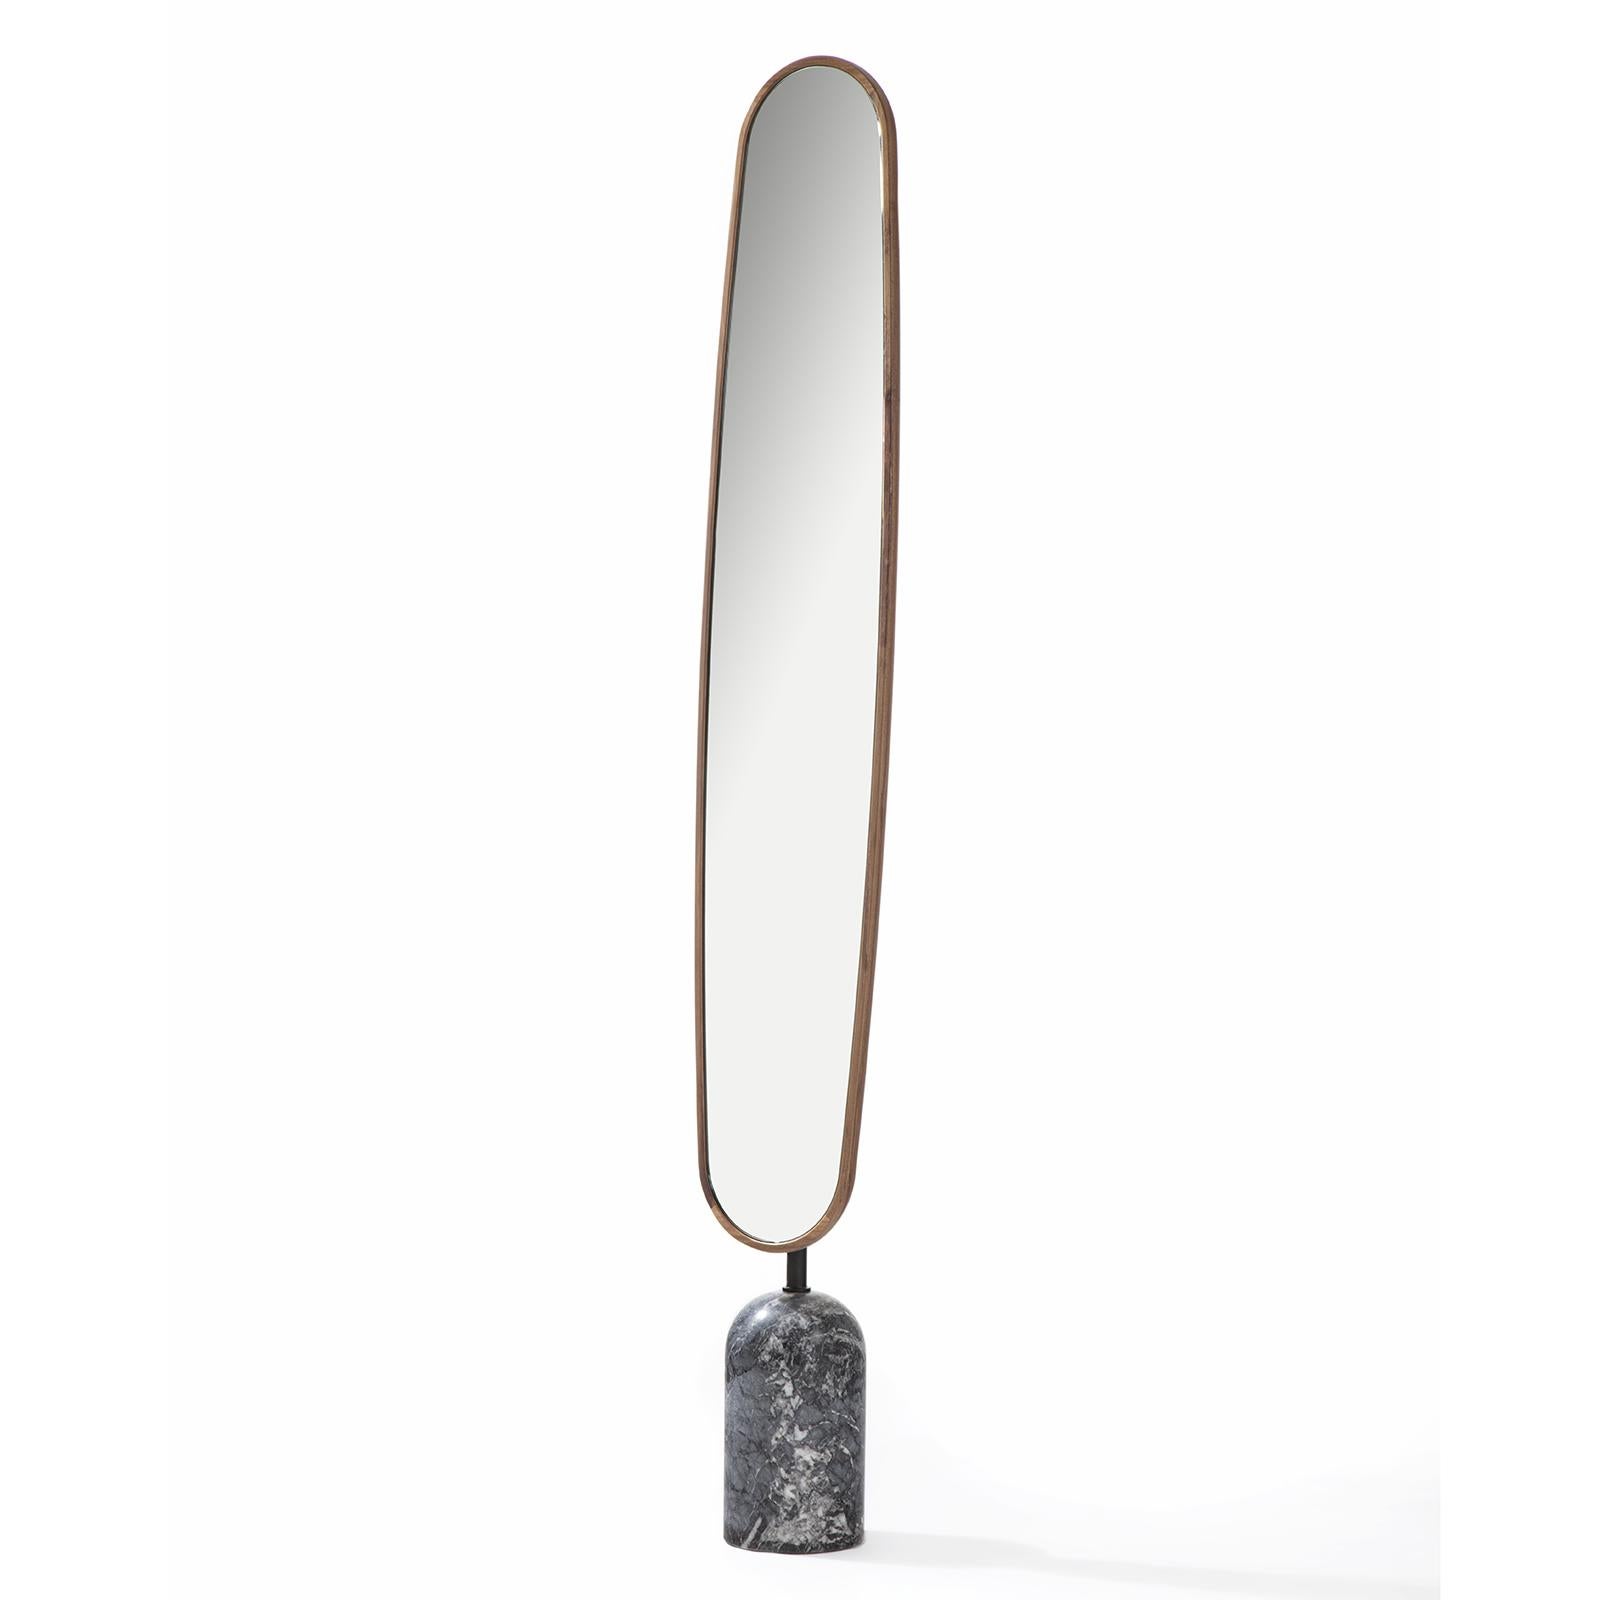 Mirror Stelle with grey marble base and with oval mirror
with solid walnut frame. With metal pole in tin finish at
the mirror back.